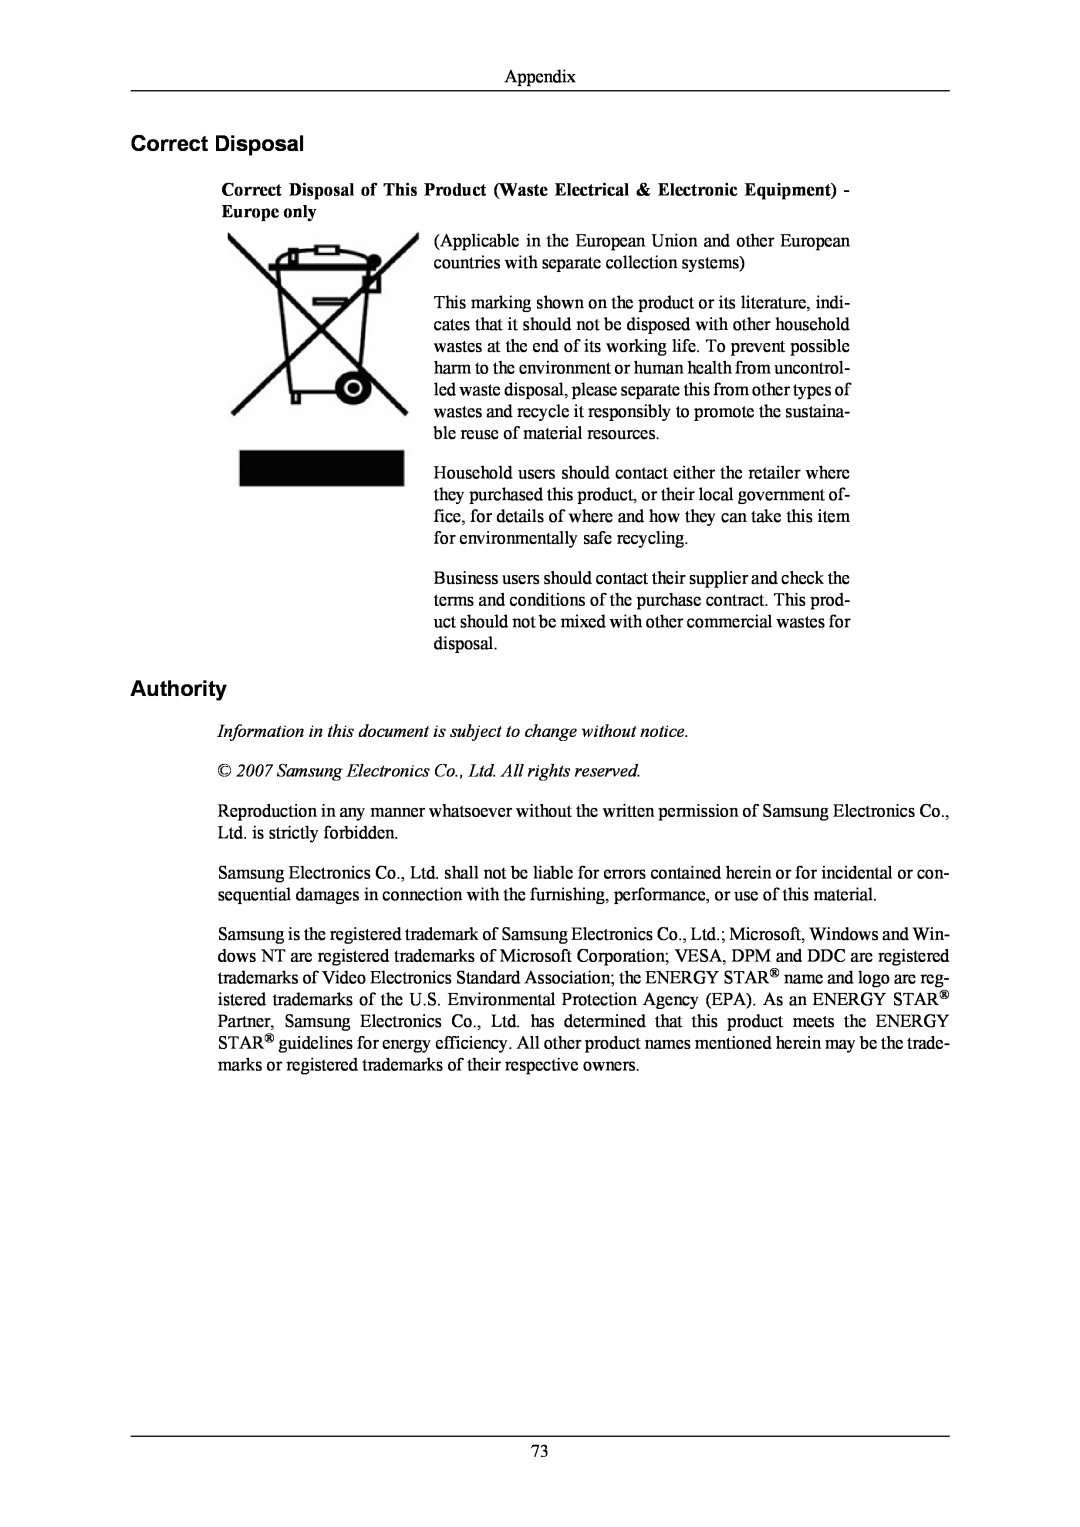 Samsung 943BX, 743B Correct Disposal, Authority, Information in this document is subject to change without notice 